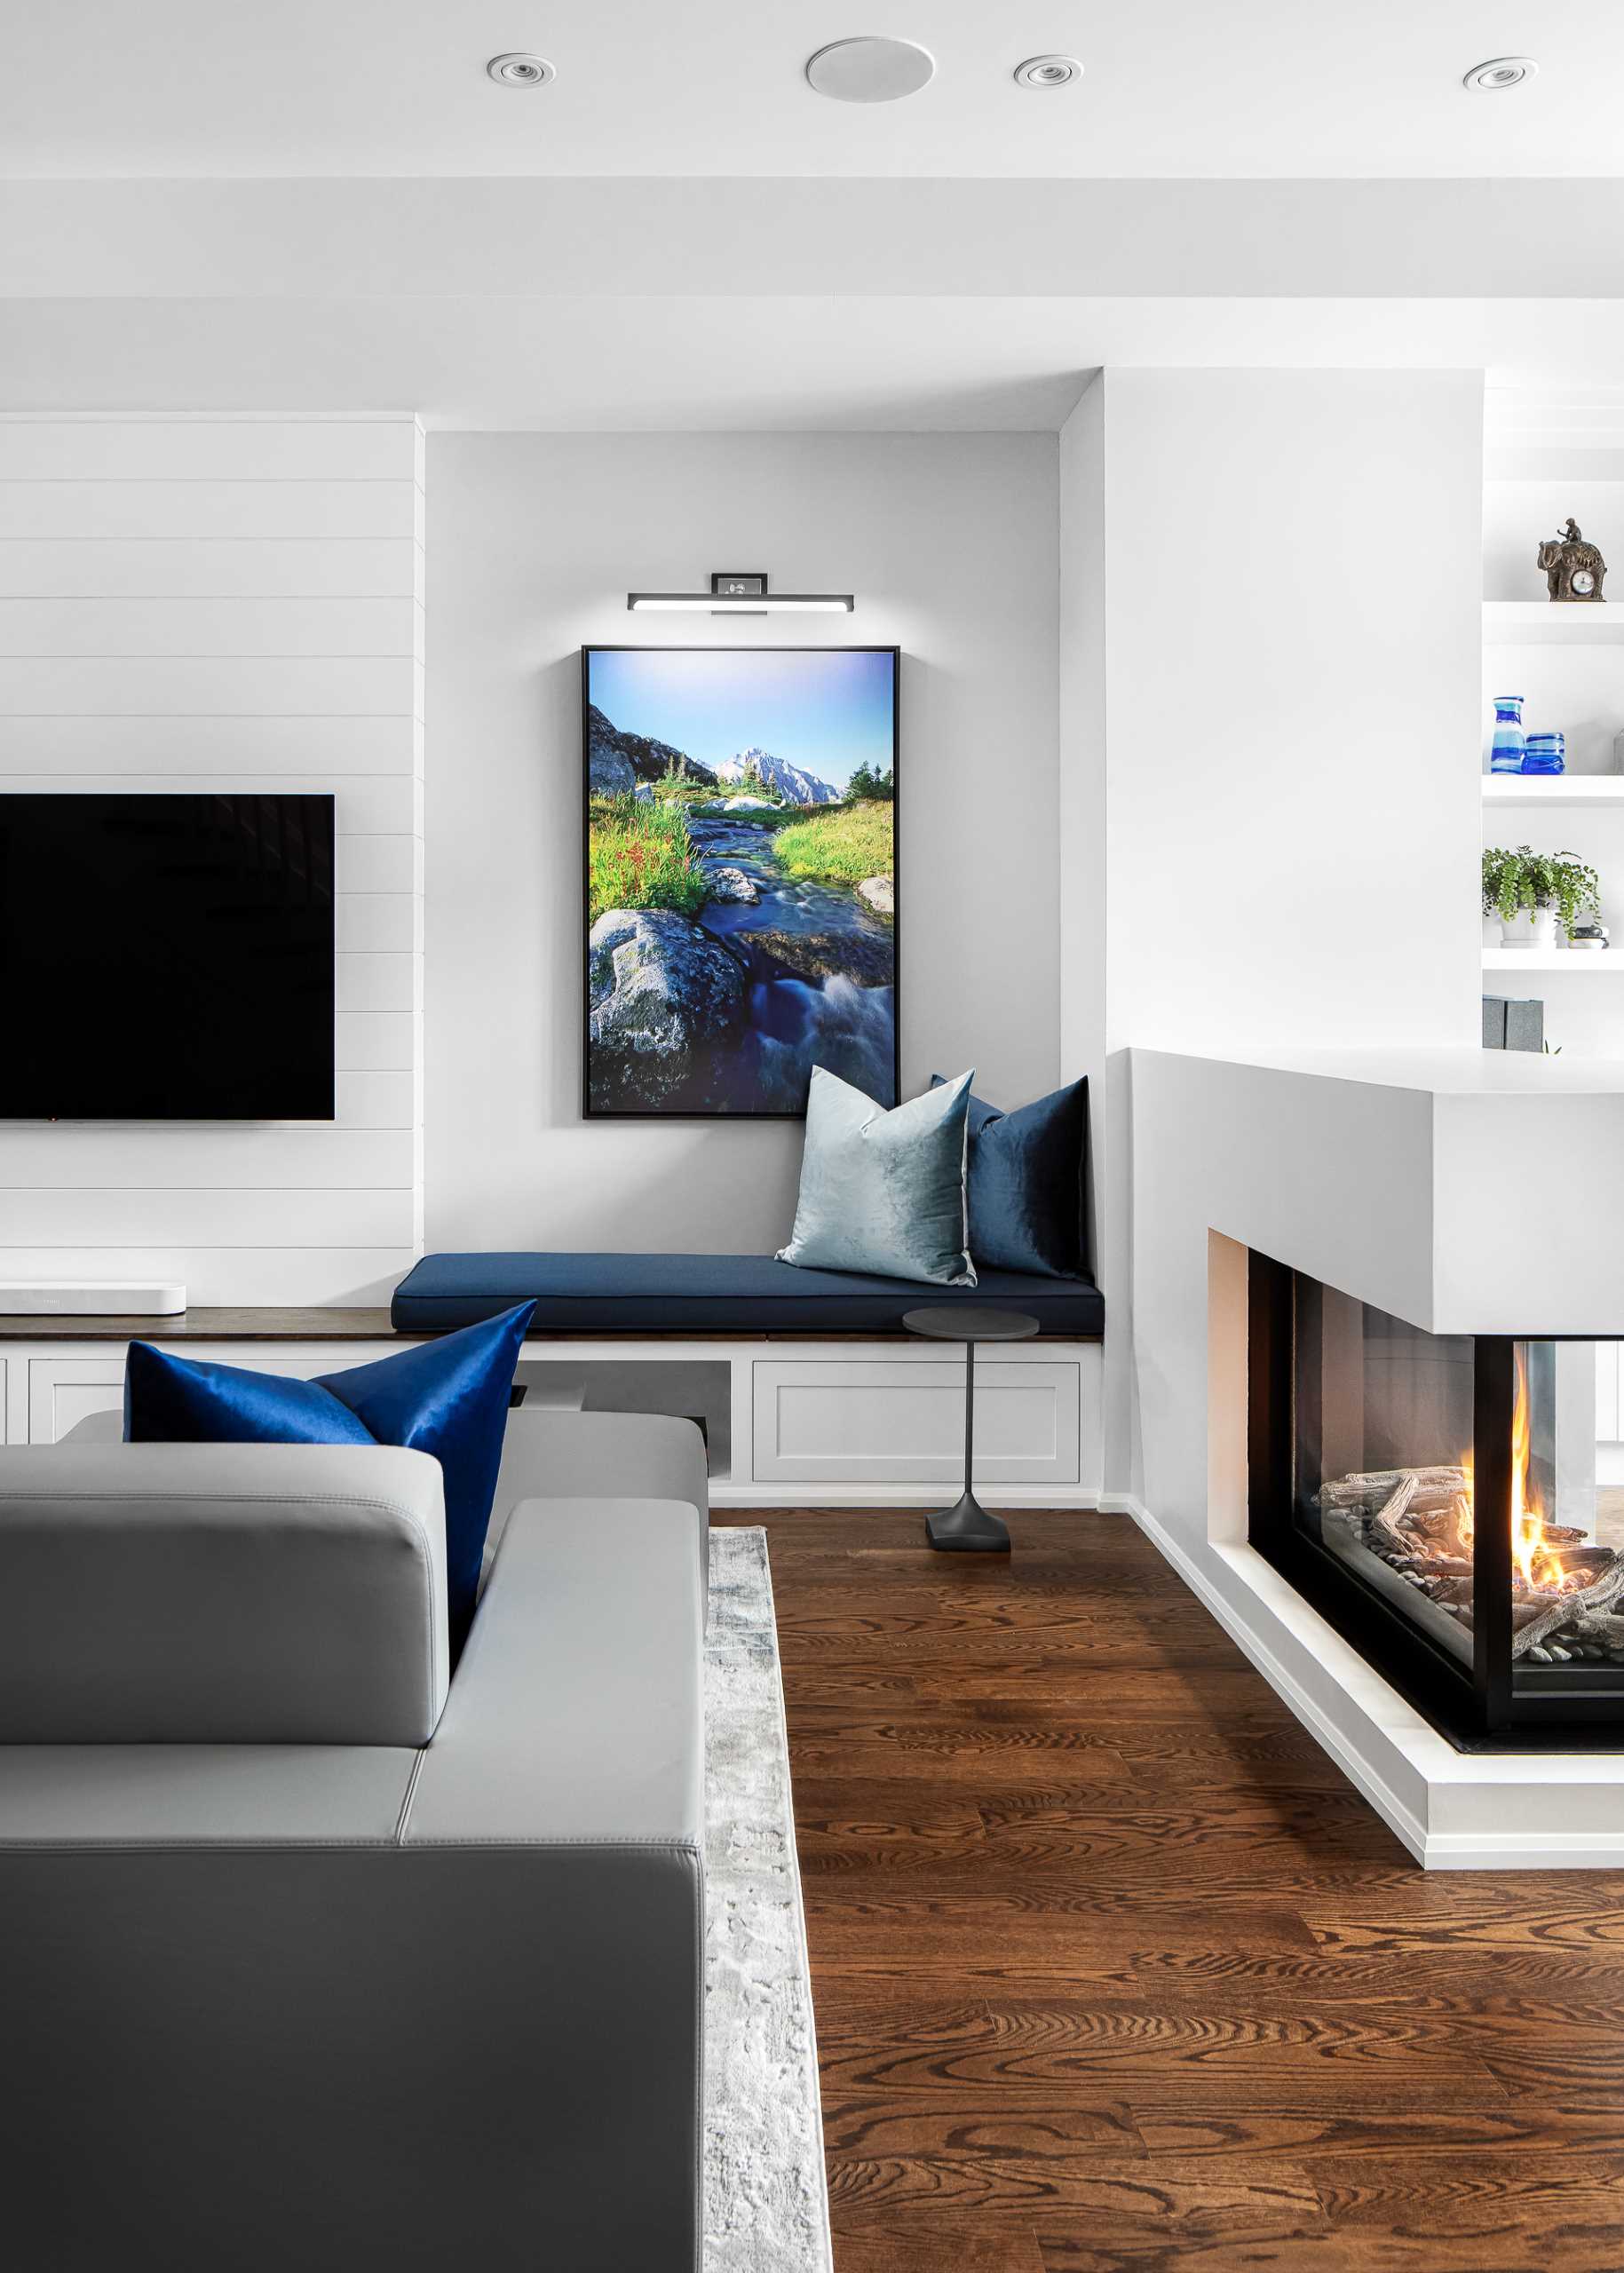 A low three-sided fireplace acts as a room divider separated the living room from the home office.